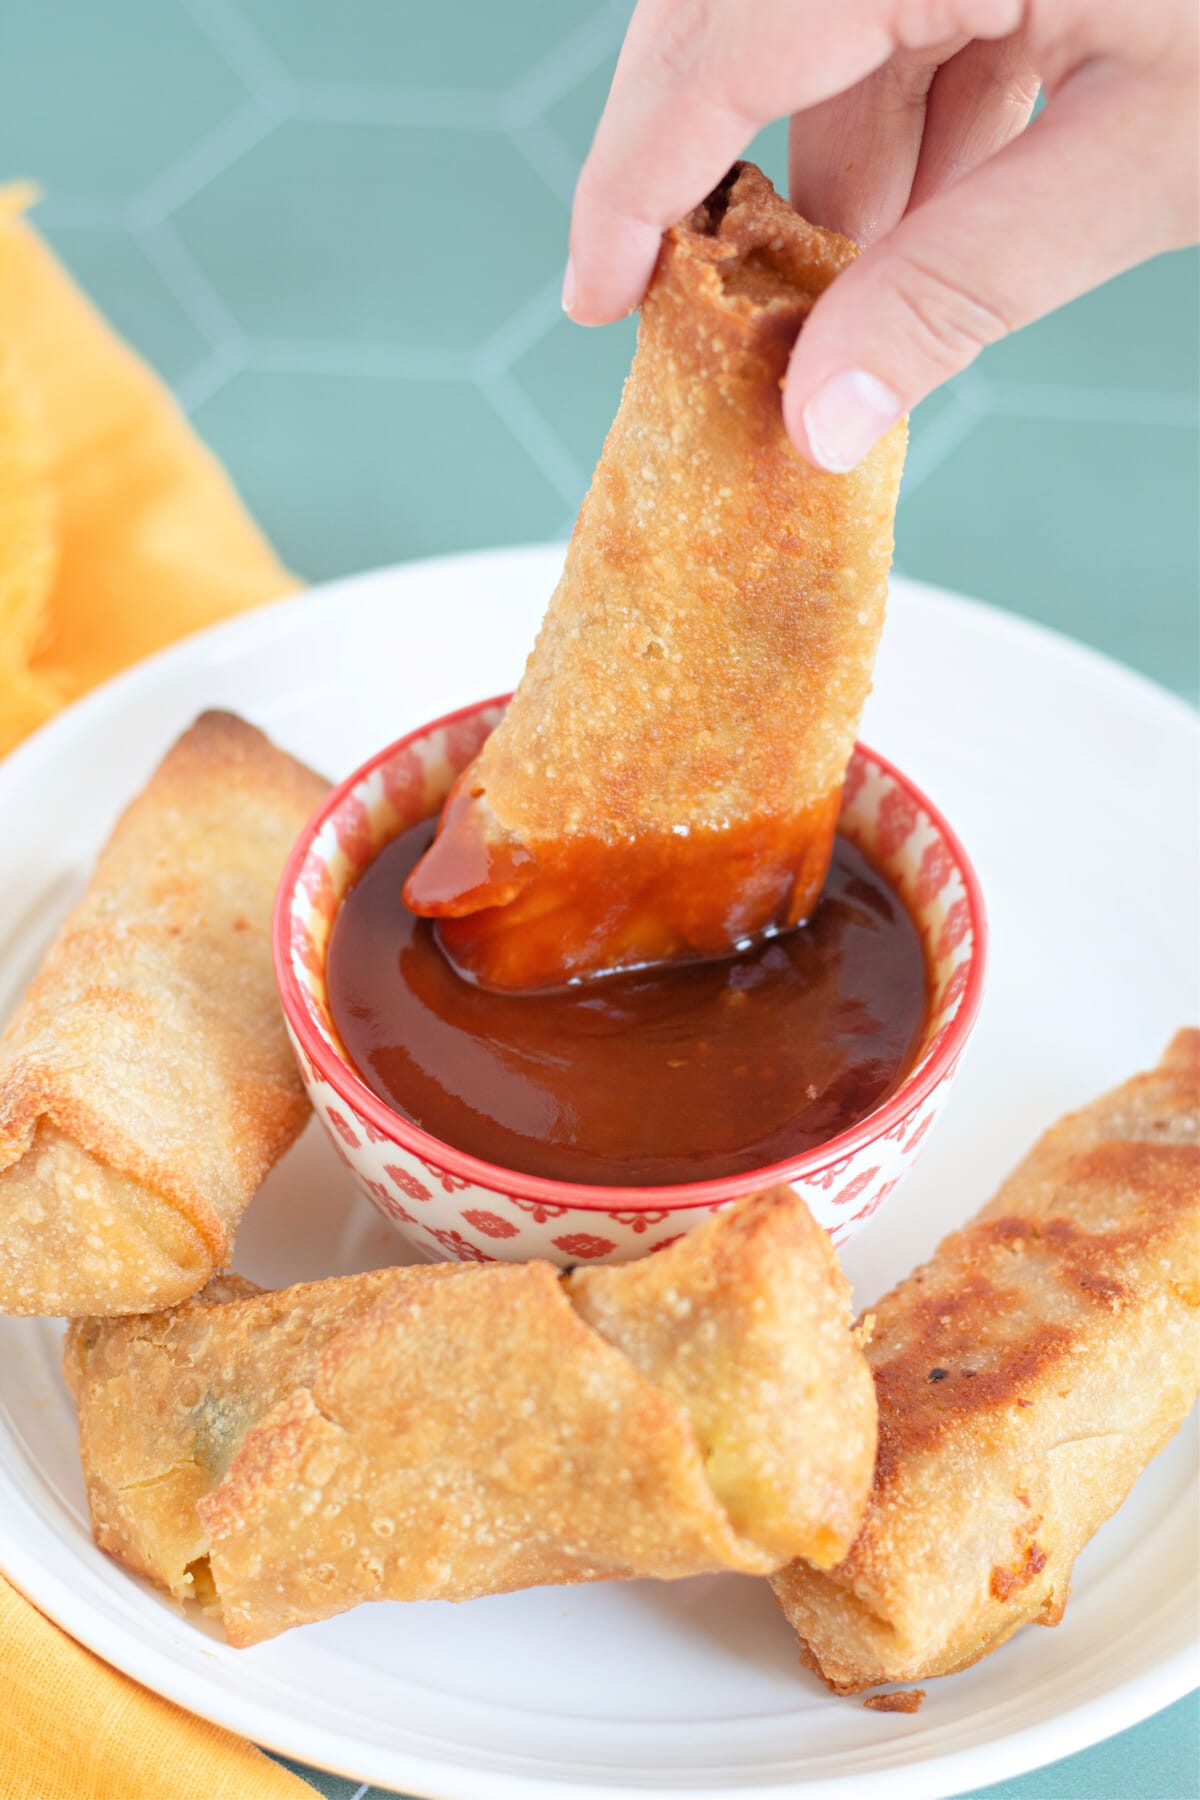 Dipping an Egg Roll into Sweet and Sour Sauce